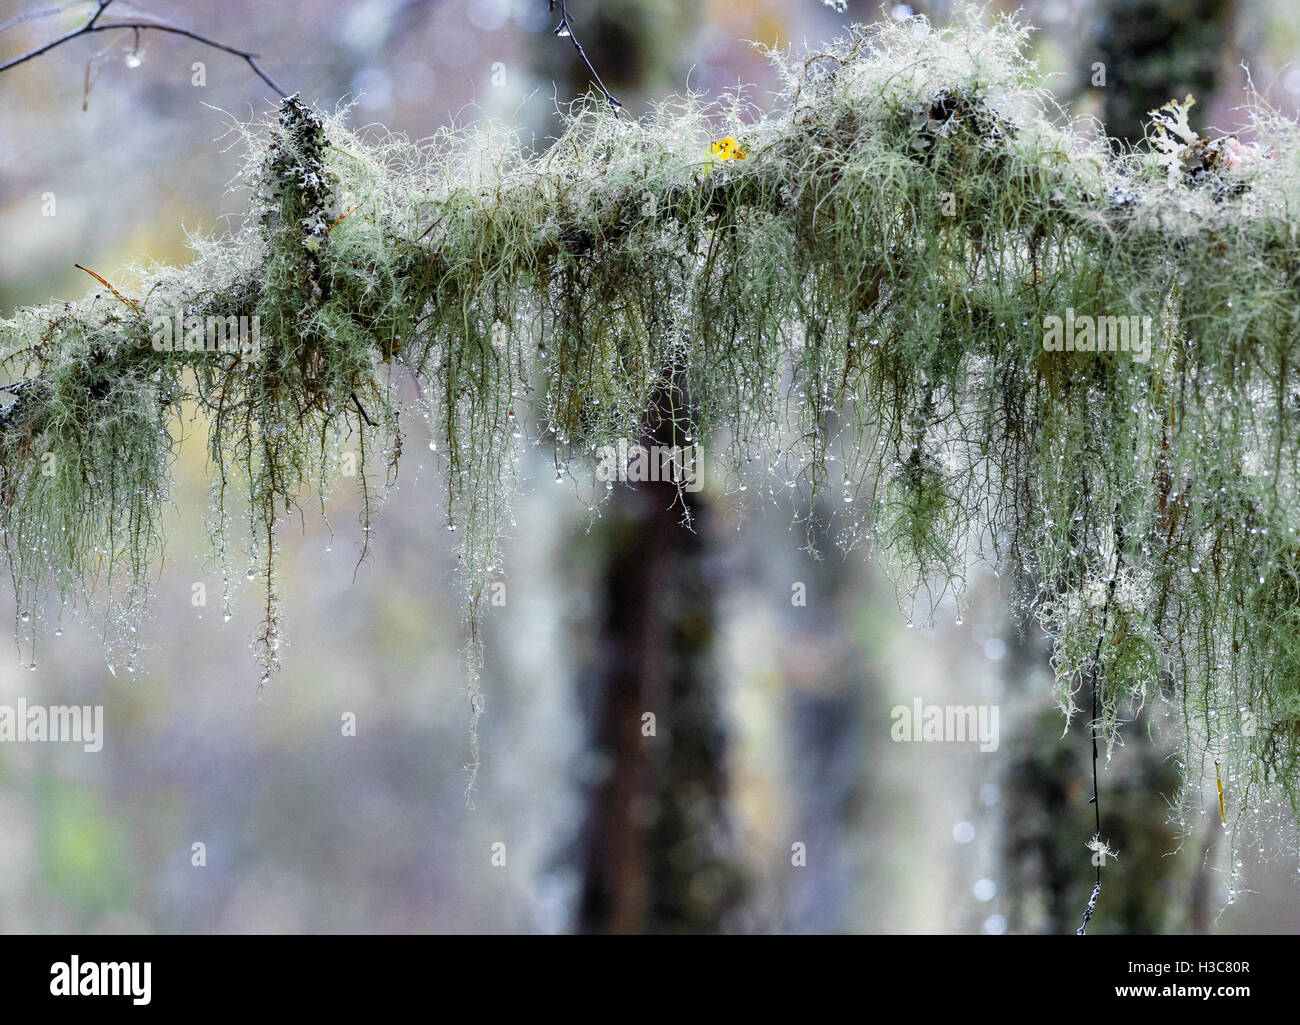 Lichen growing on the small branches of a beech tree in a damp Scottish Wood. Stock Photo